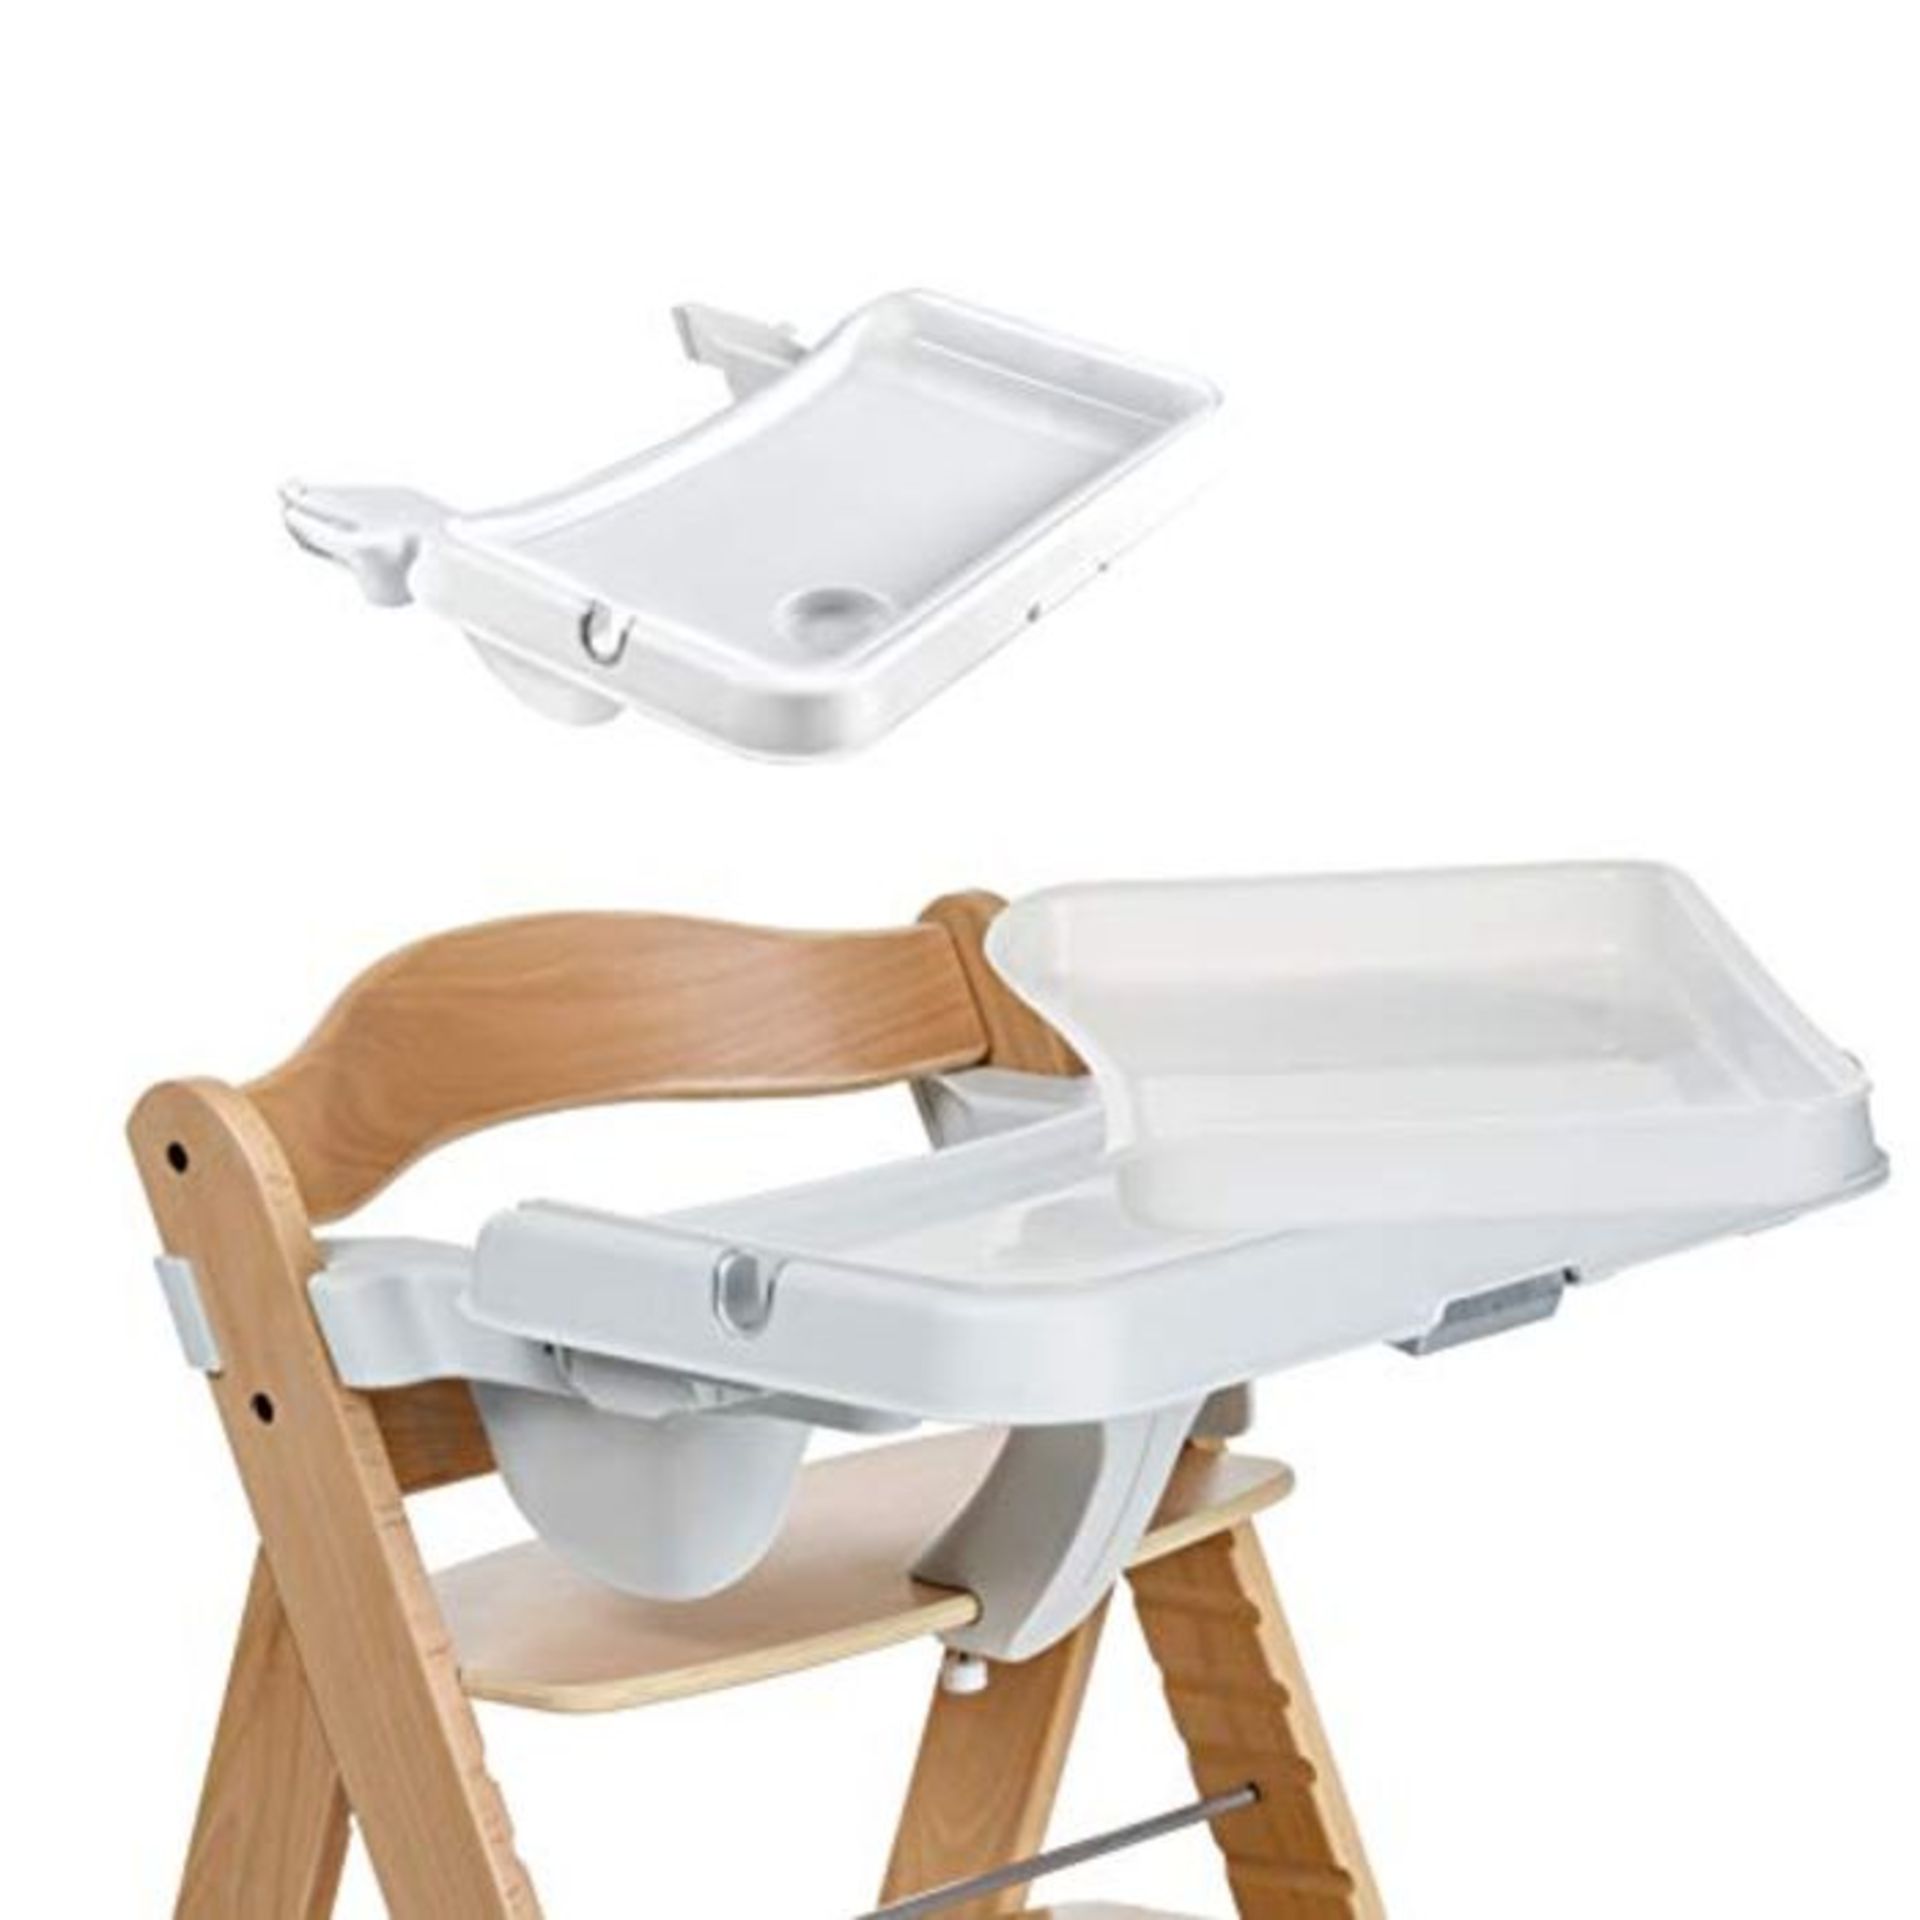 Hauck Alpha Tray, 3-in-1 Table Set for Hauck Wooden Highchairs Alpha, Beta, Depth Ad